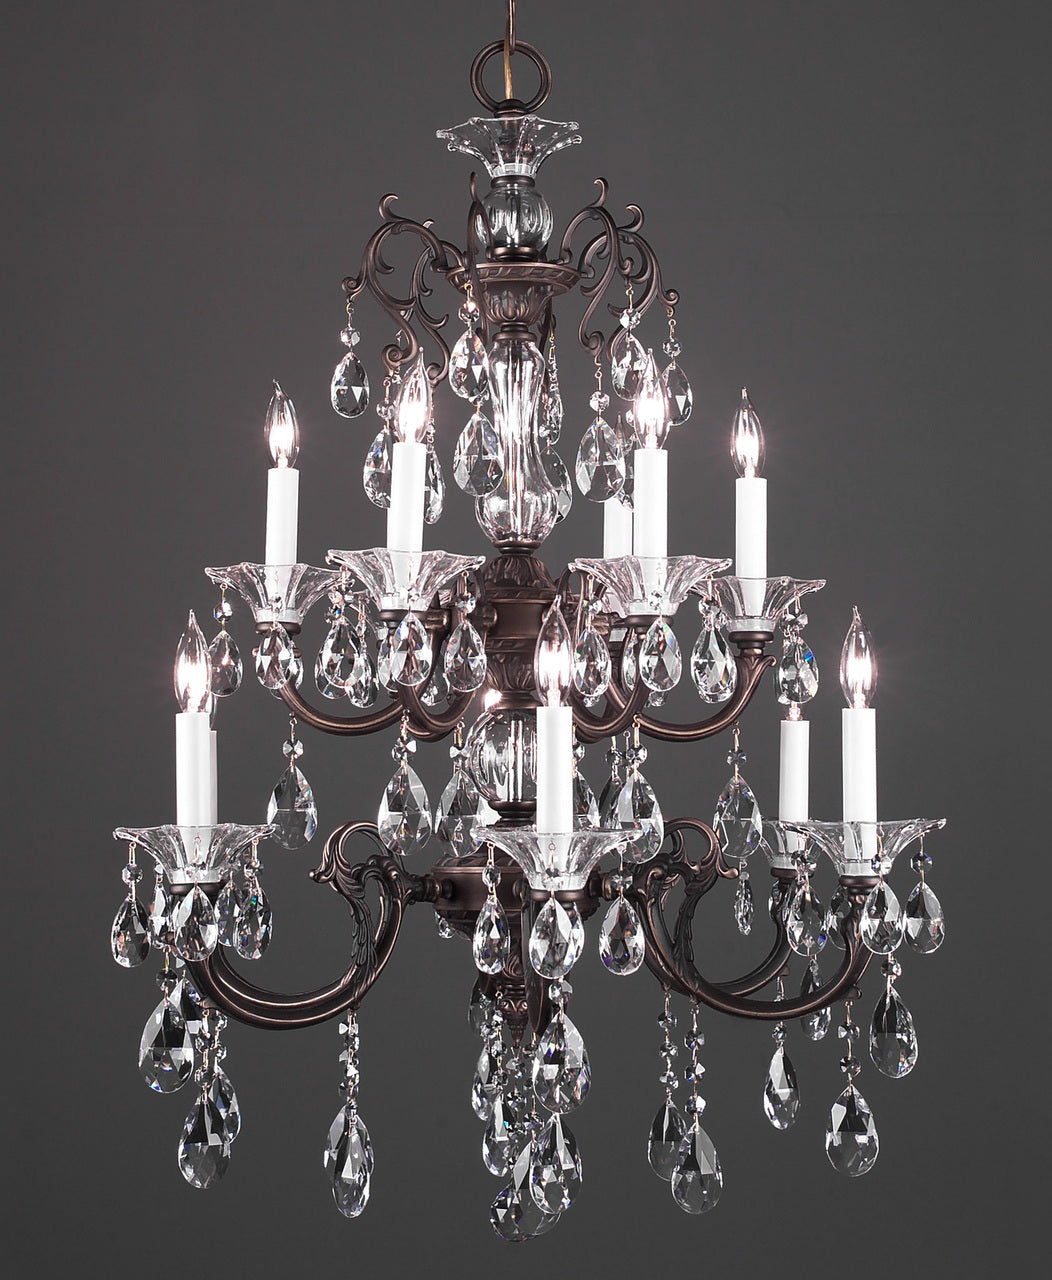 Classic Lighting 57062 RB CBK Via Lombardi Crystal Chandelier in Roman Bronze (Imported from Spain)